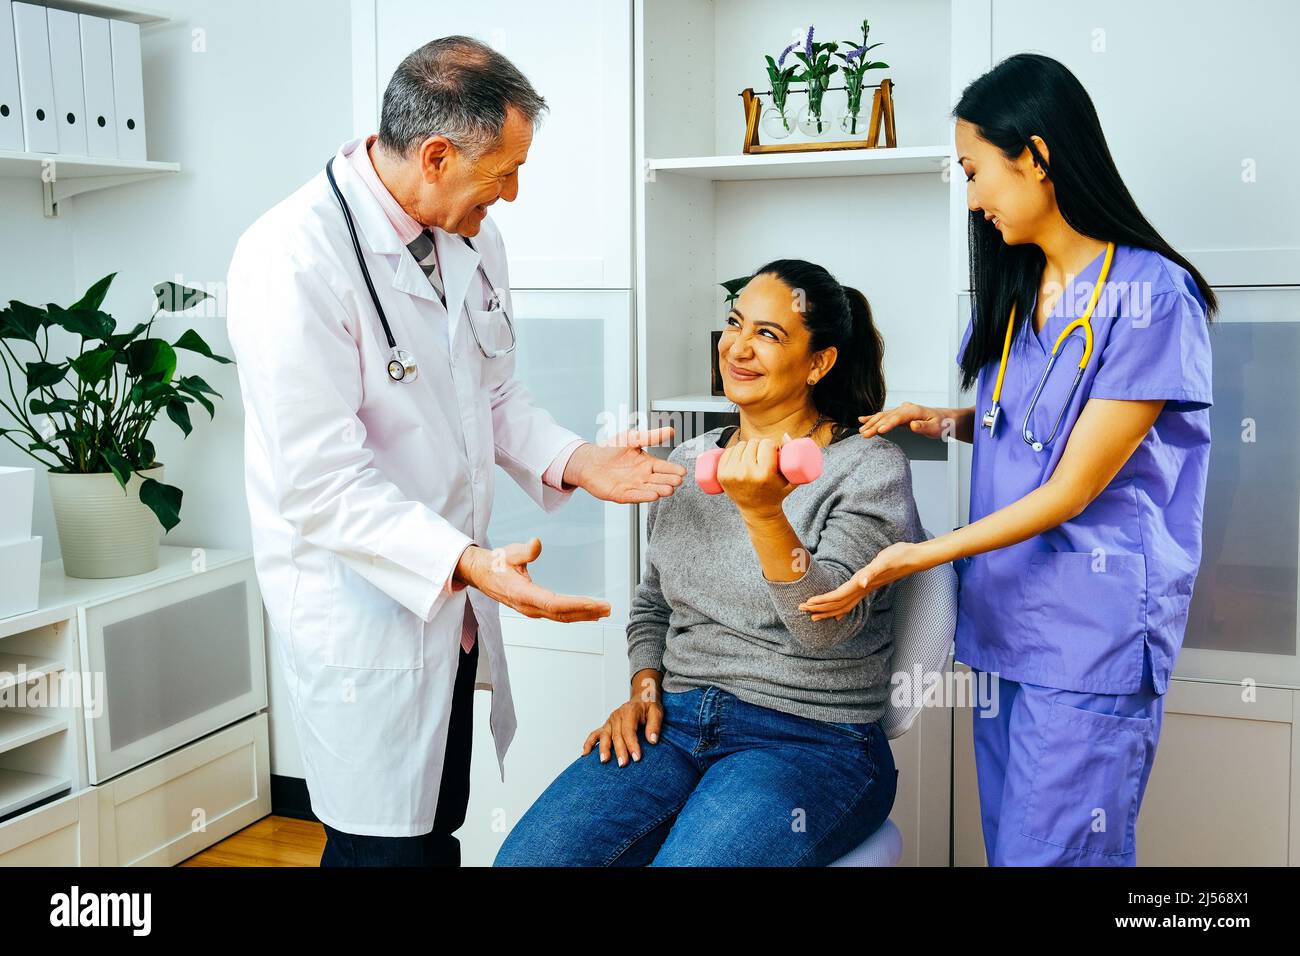 smiling rehabilitation doctor physiotherapist physician and nurse practitioner helping patient lift dumbbell with one hand. Healthcare industry clinic Stock Photo